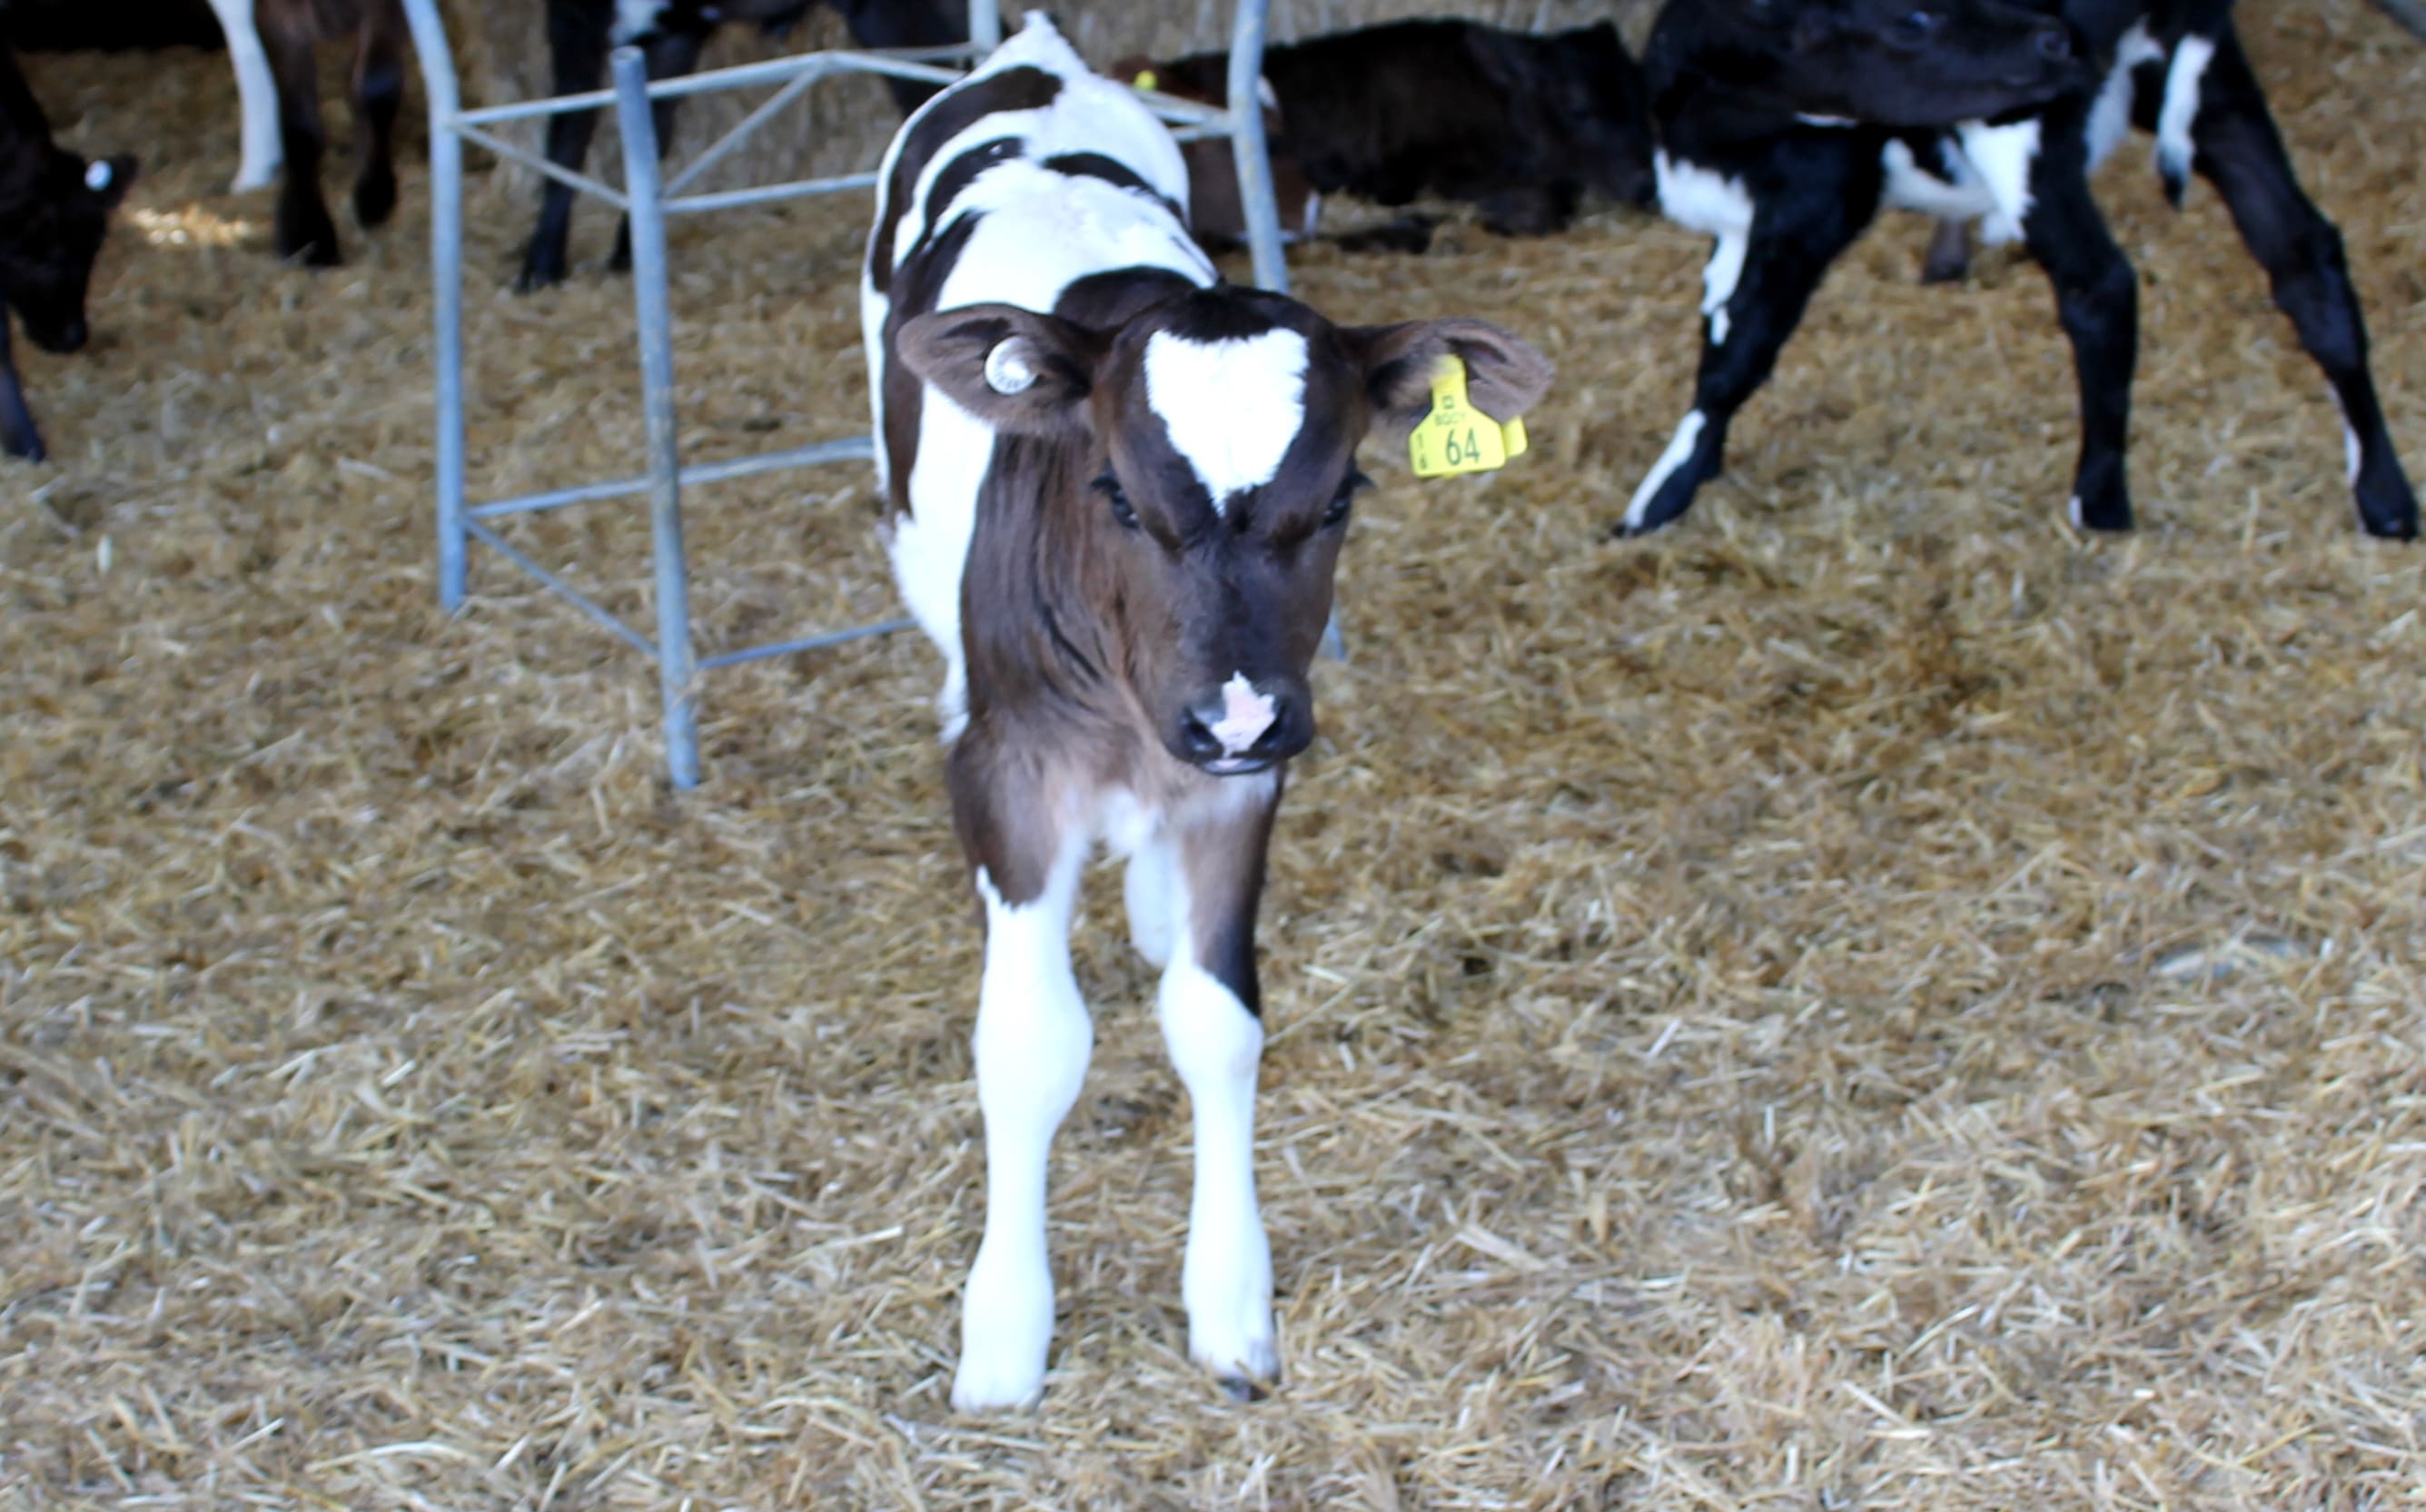 A calf at the Lincoln University Dairy Farm